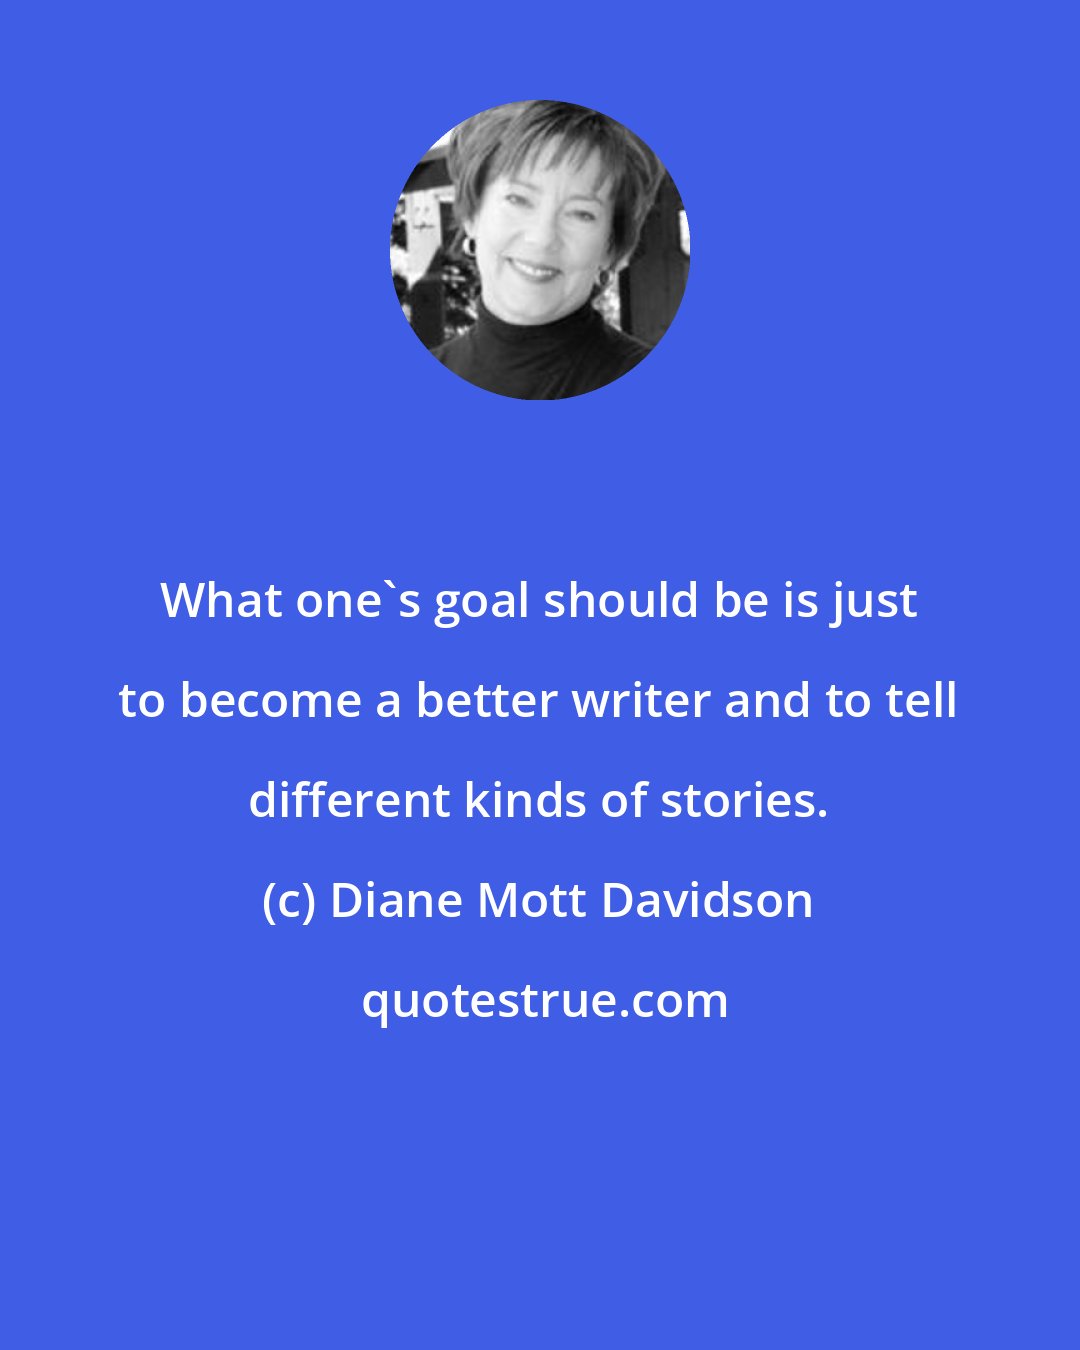 Diane Mott Davidson: What one's goal should be is just to become a better writer and to tell different kinds of stories.